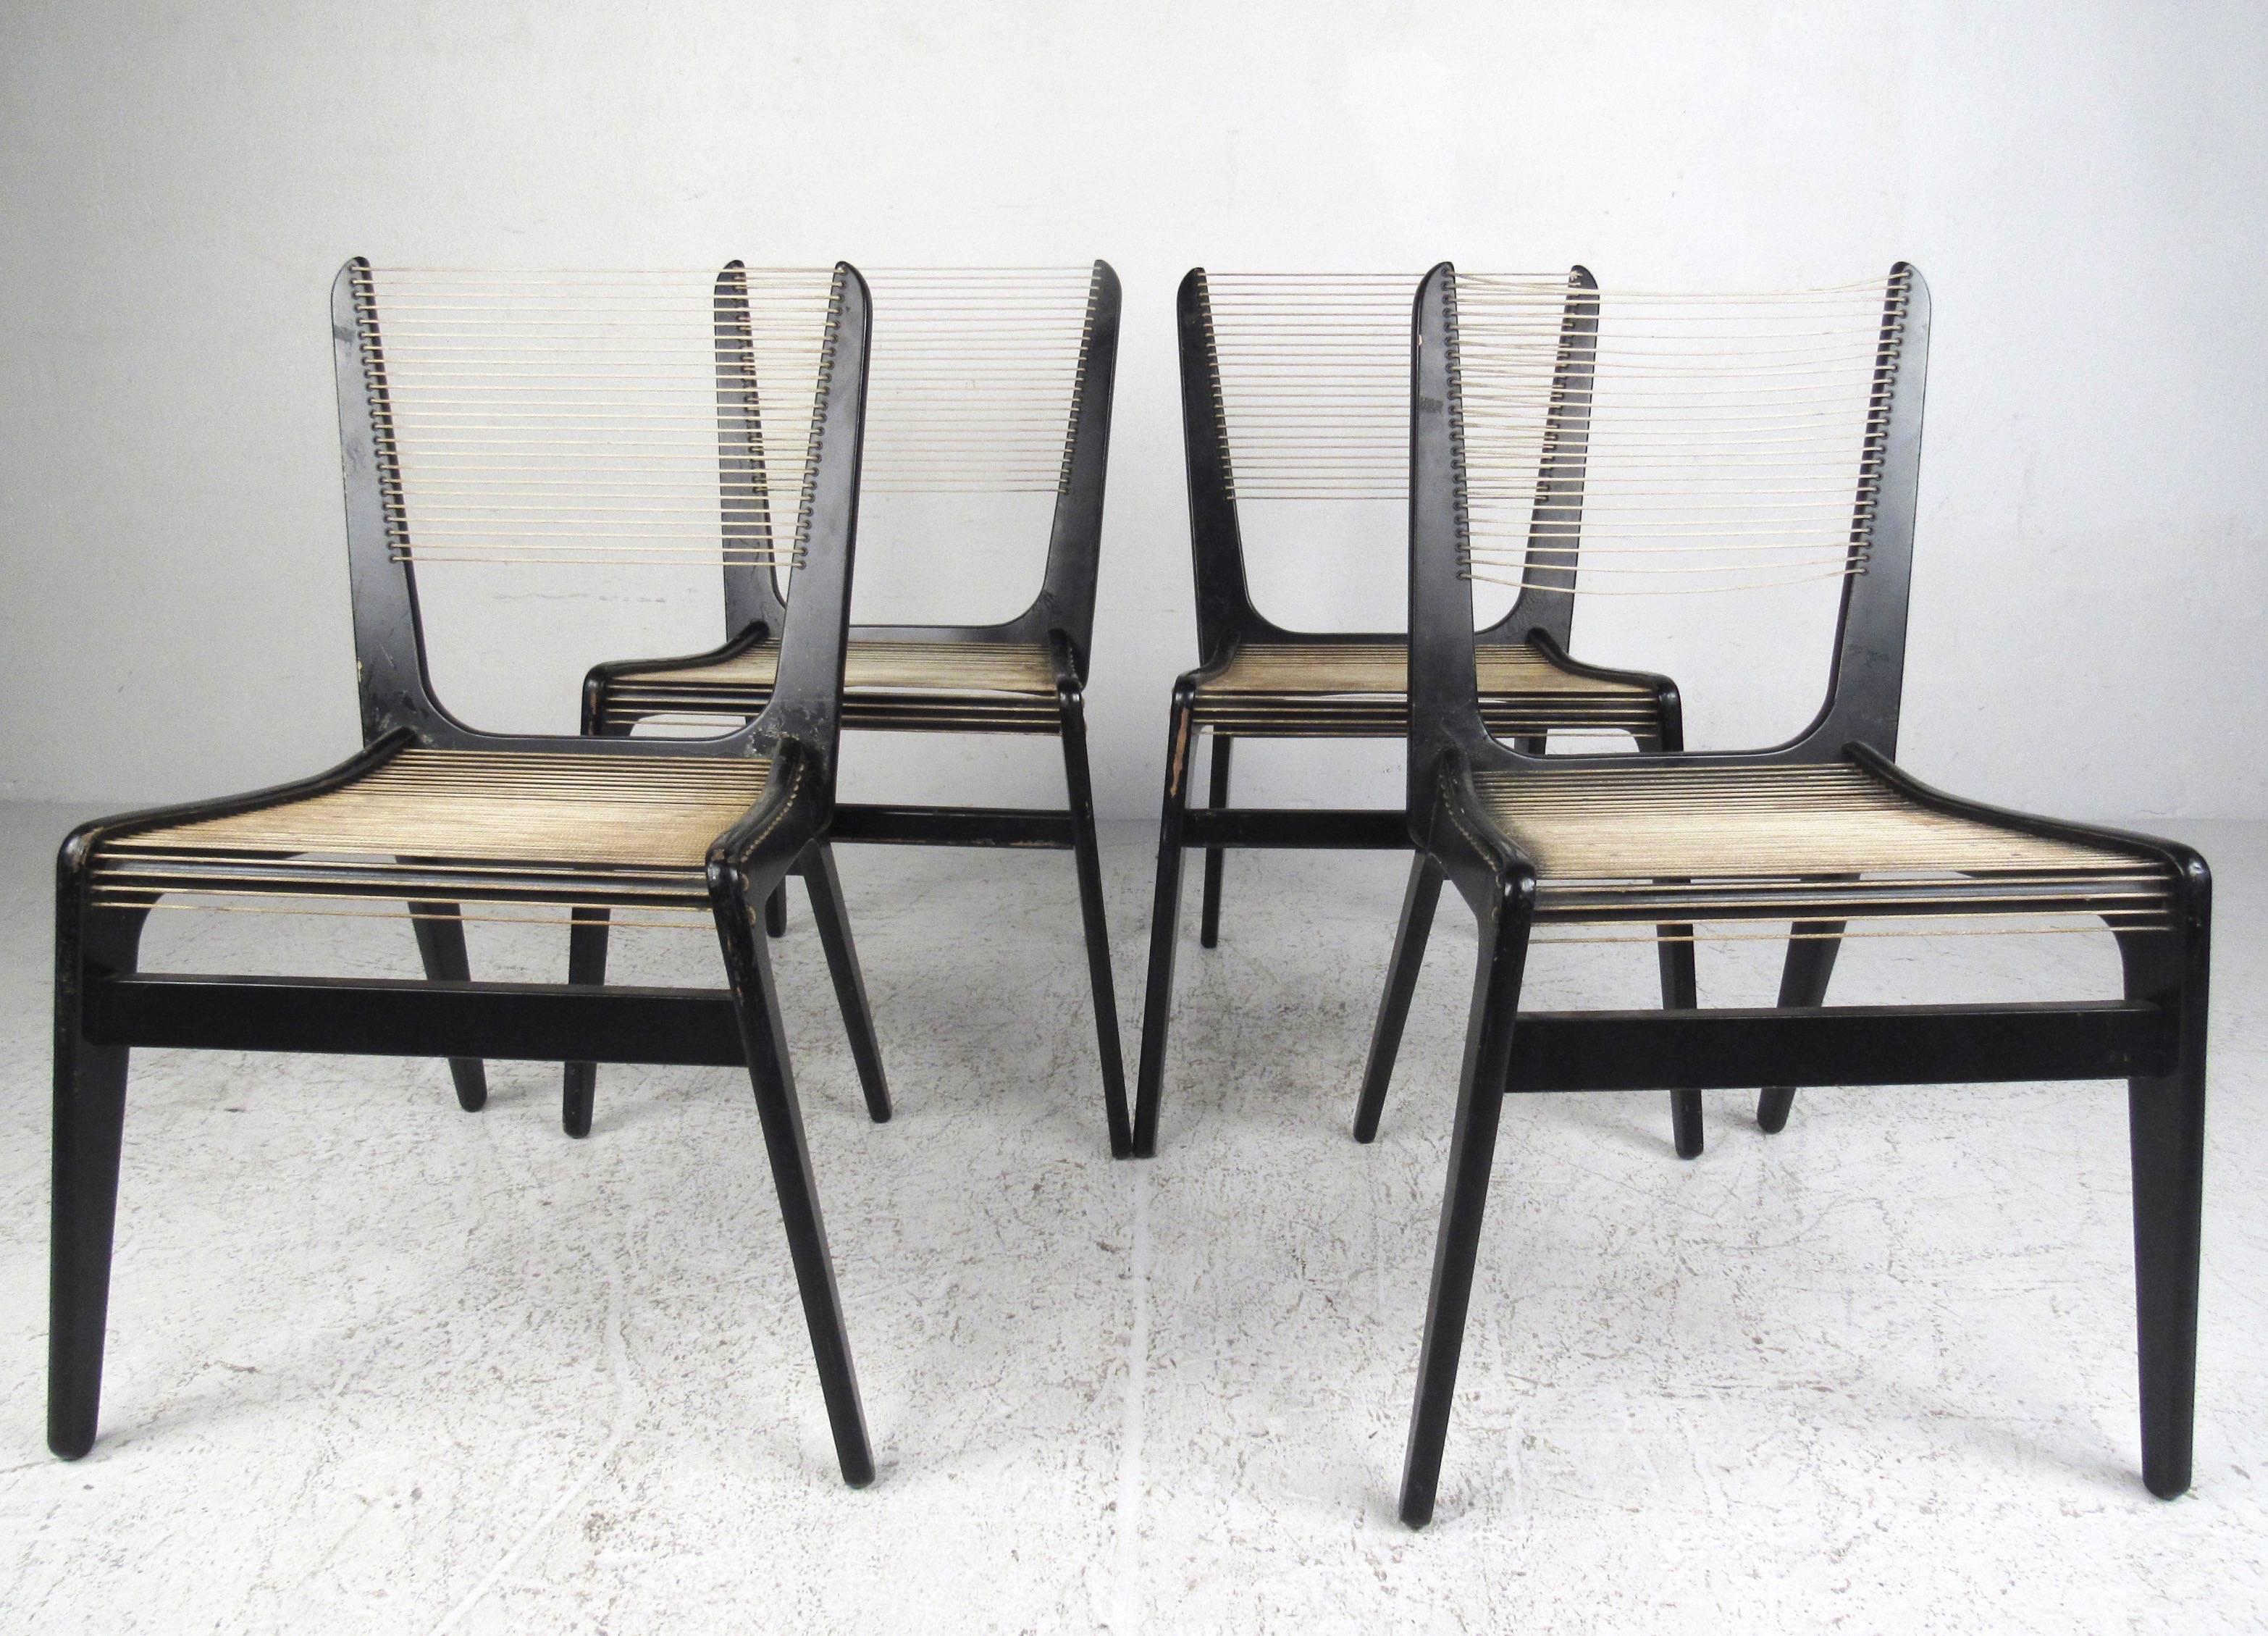 This rare set of Mid-Century Modern dining chairs by Jacques Guillon features black lacquered wooden frames with rope cord seat and back. Stylish vintage design makes these unique string chairs an unusual and impressive addition to any dining room